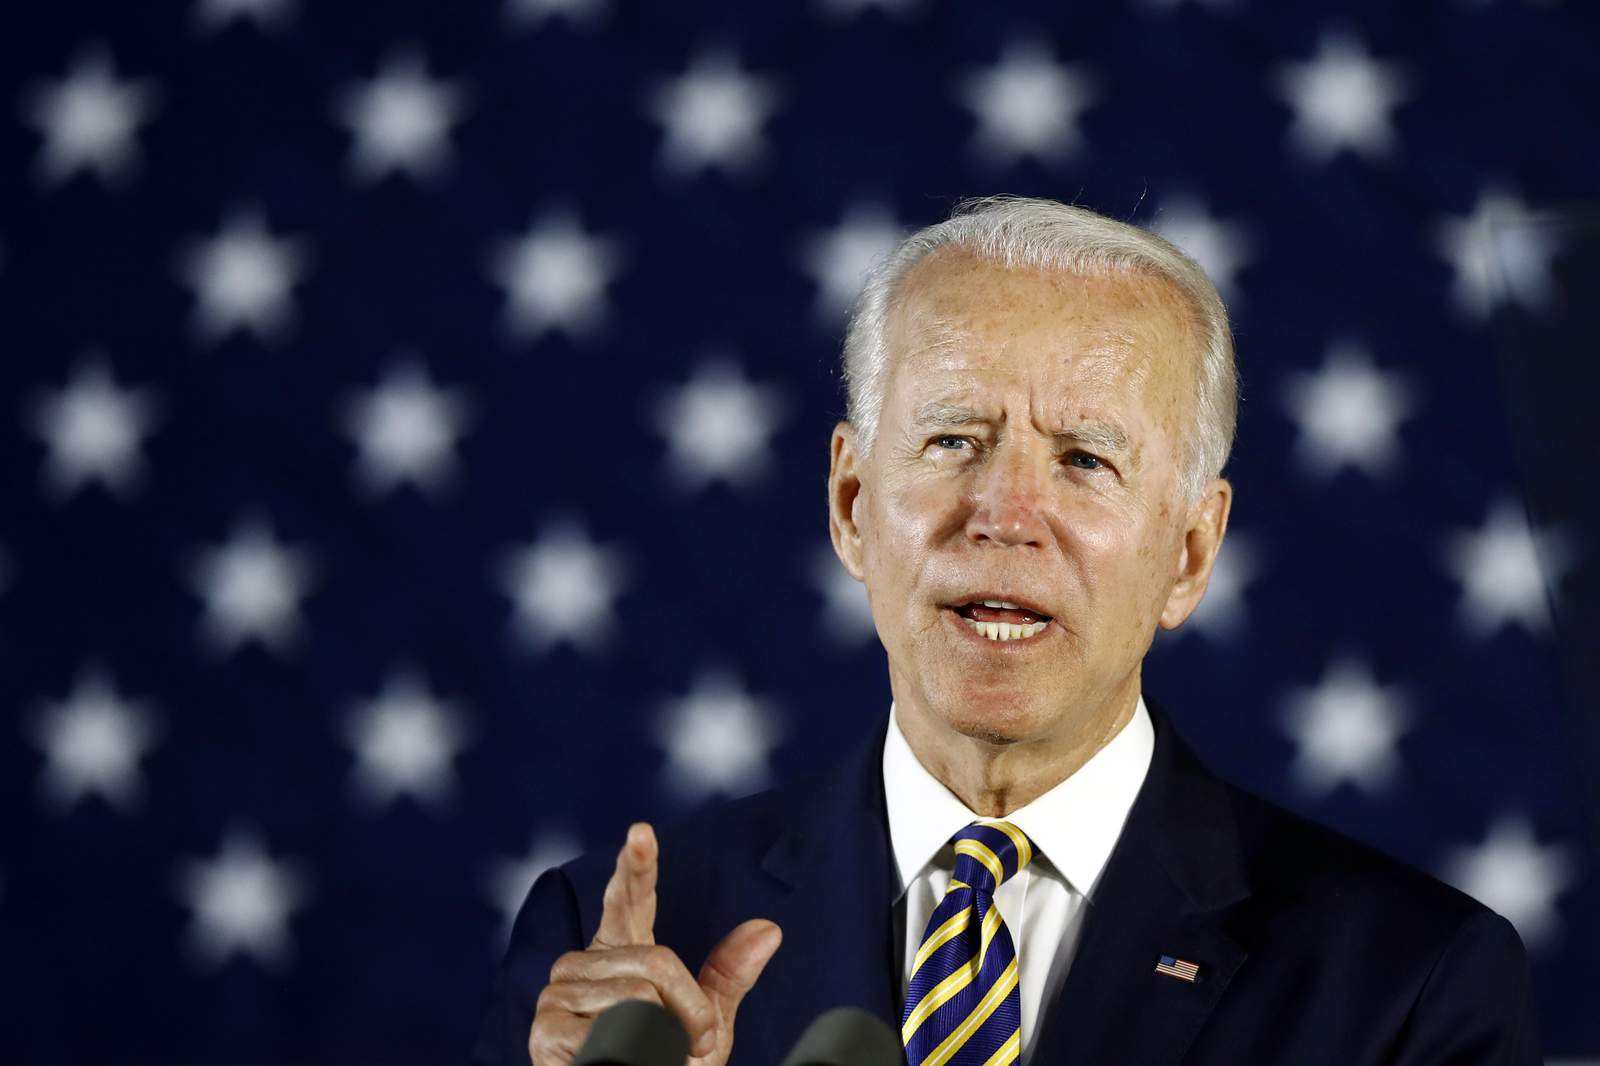 Republican operatives launch new group supporting Biden